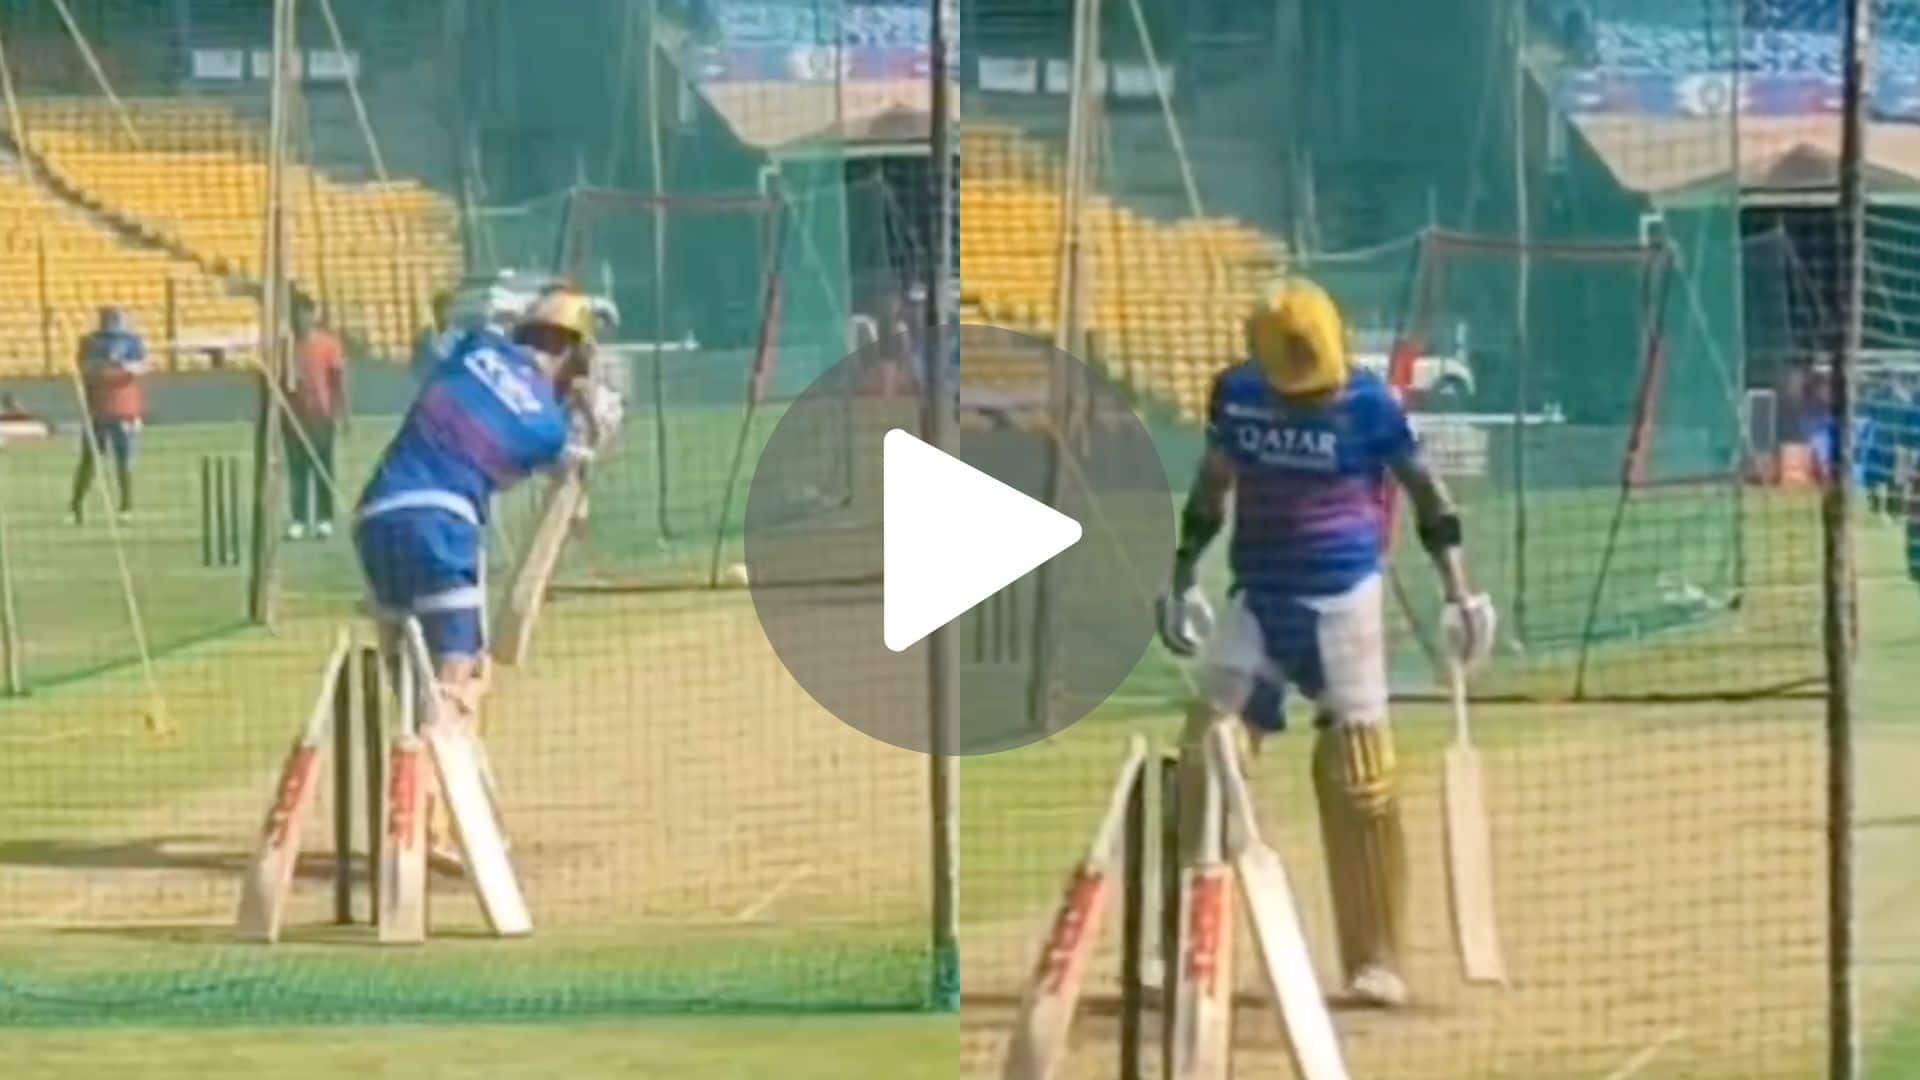 [Watch] Virat Kohli Gets Into The Groove, Practises Intensely Before IPL Game vs PBKS